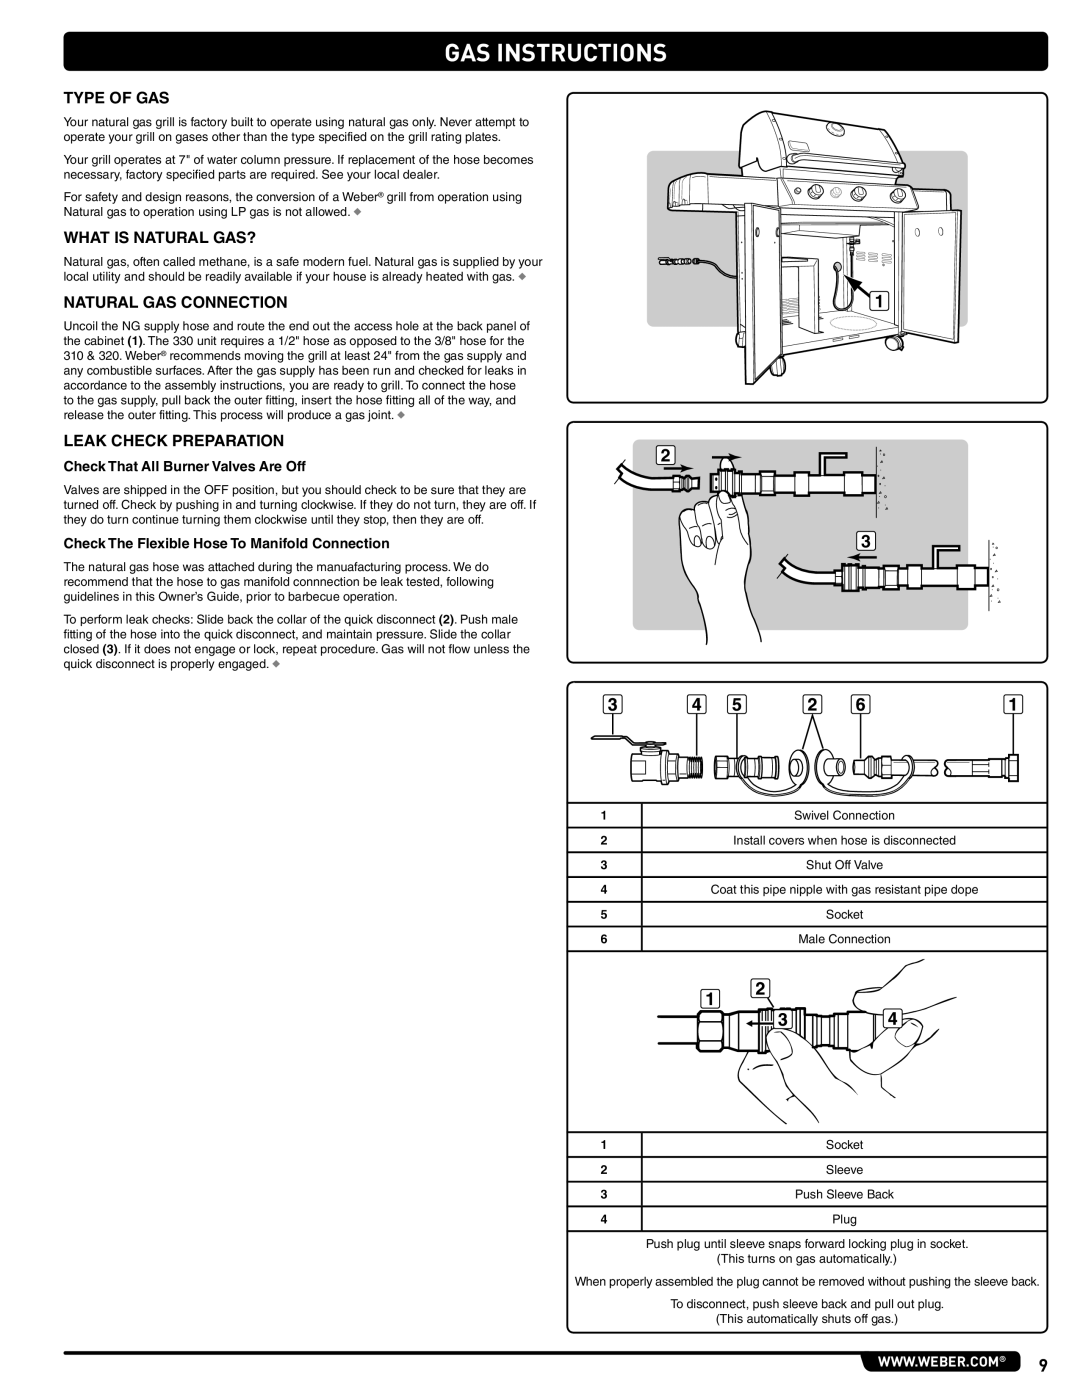 Weber 56515 Gas Instructions, Check That All Burner Valves Are Off, Check The Flexible Hose To Manifold Connection, Socket 